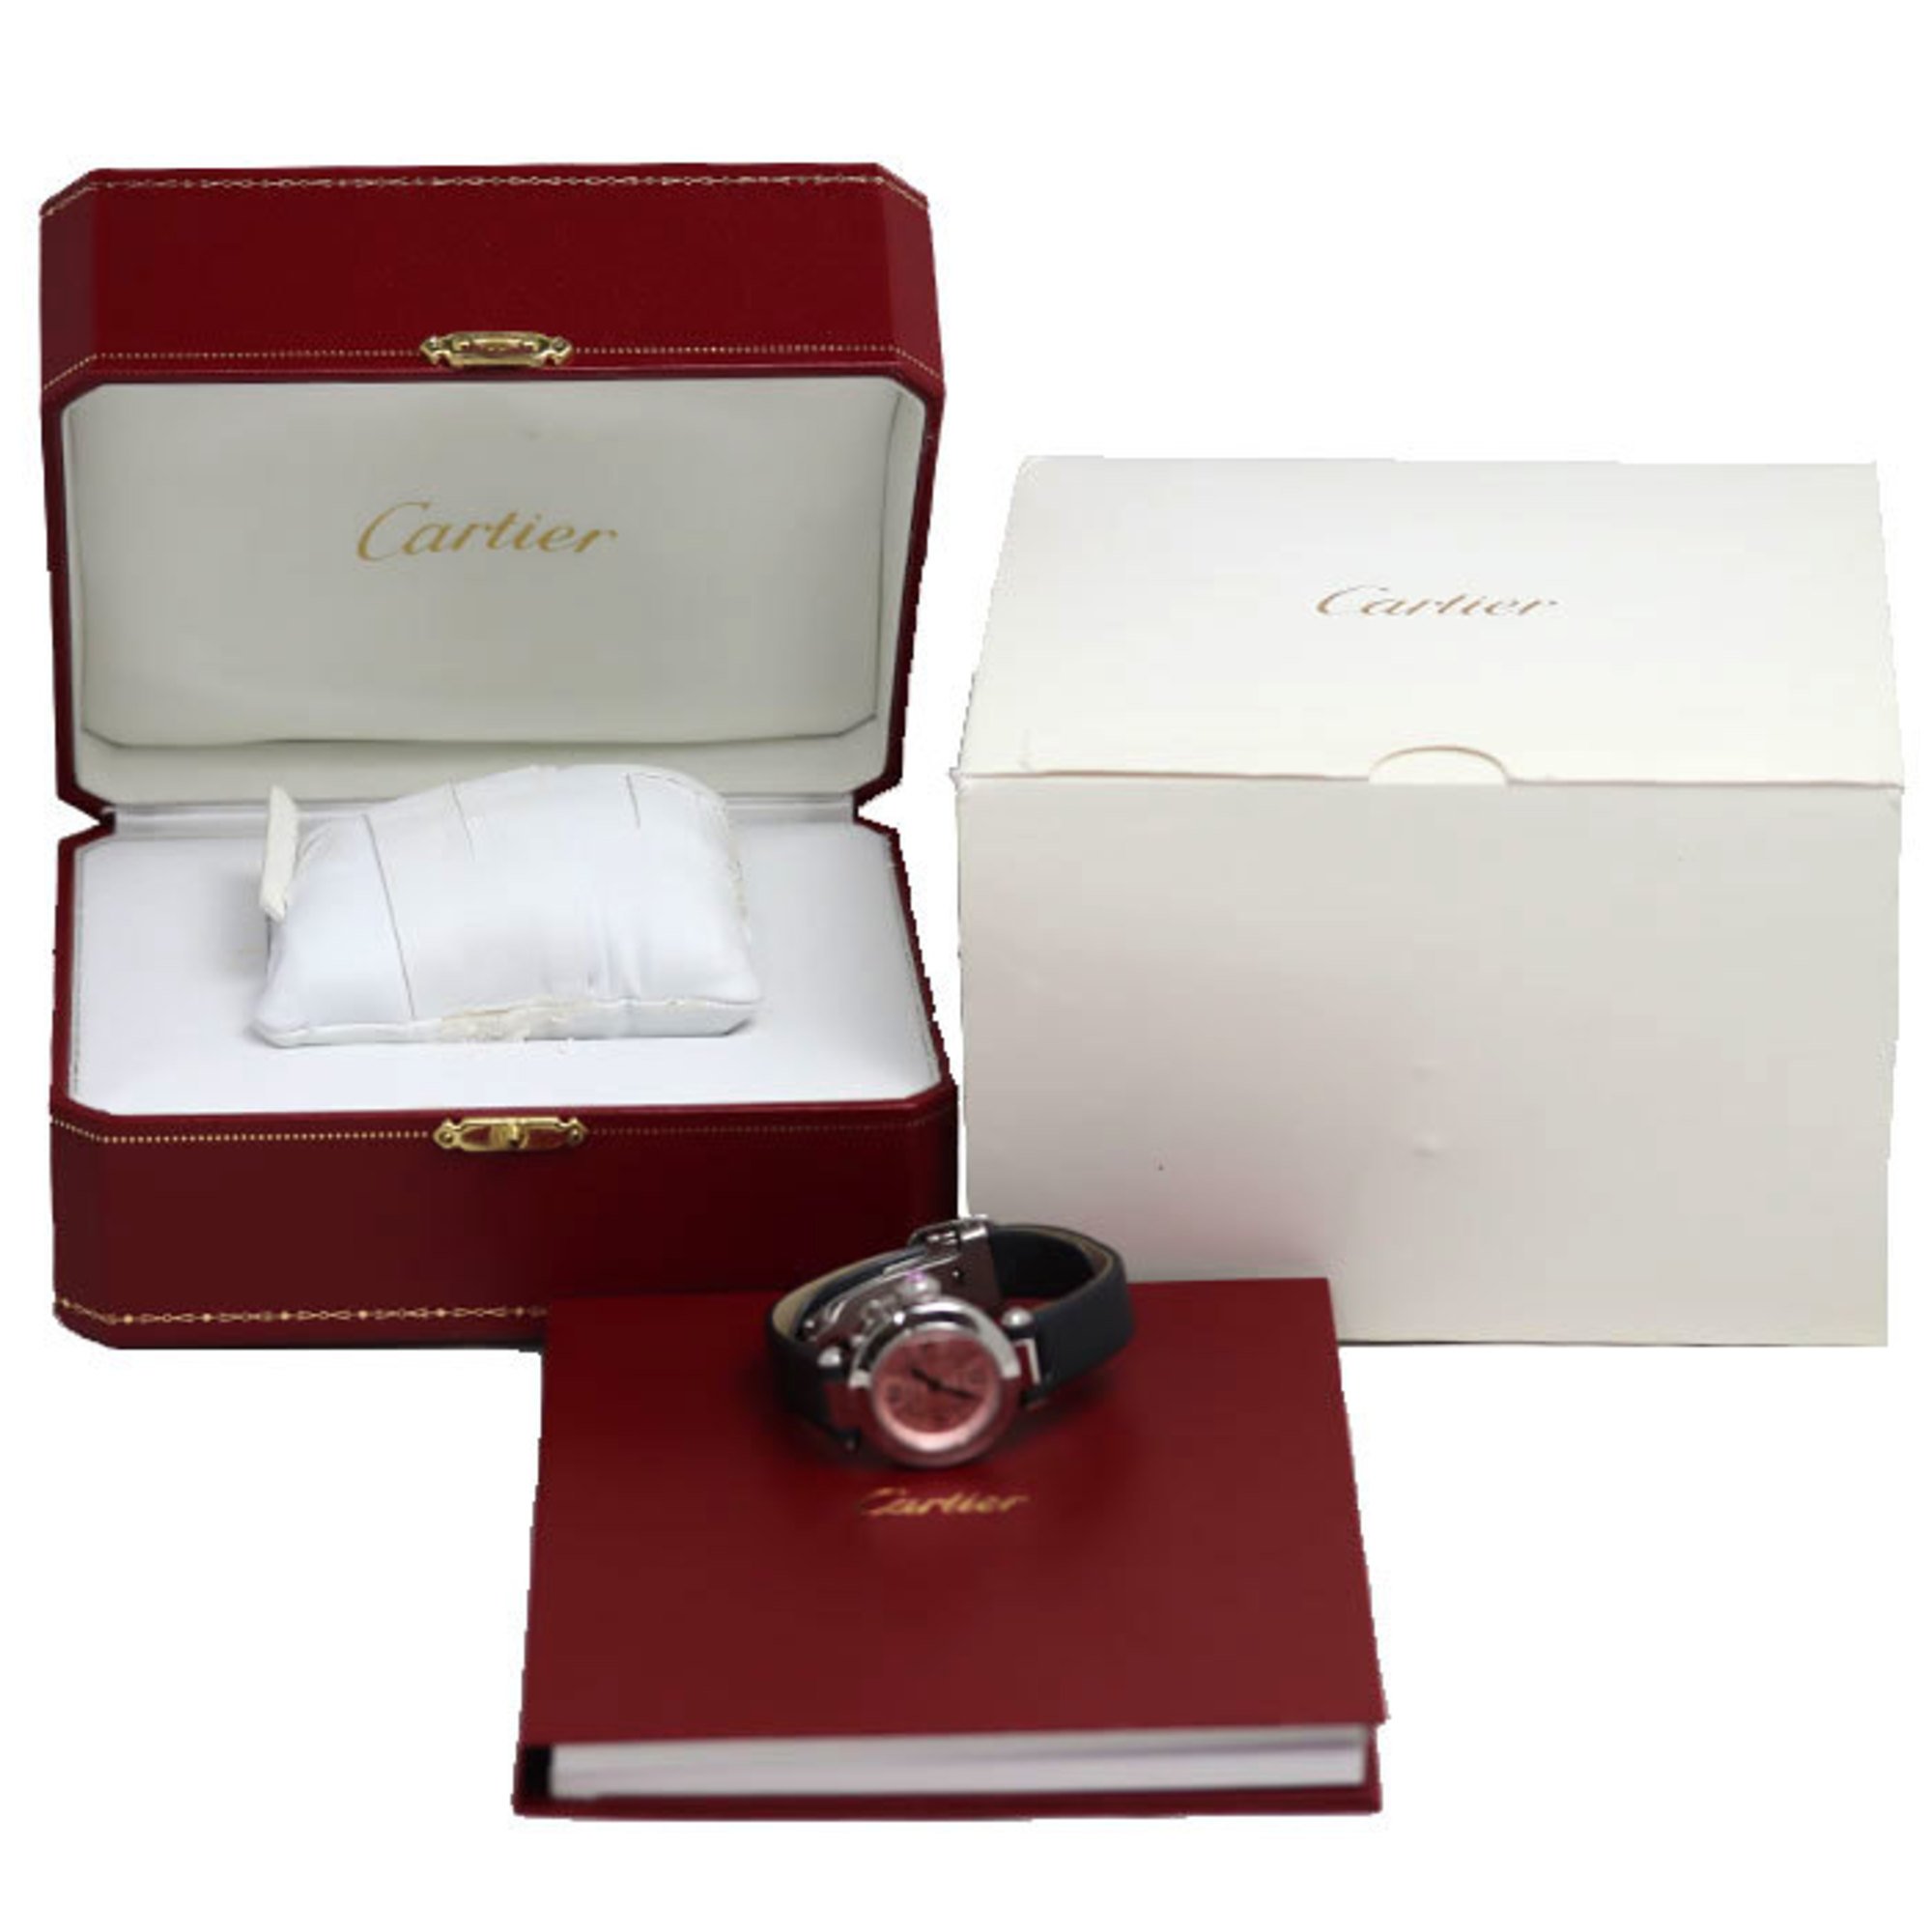 CARTIER Miss Pasha watch, battery-operated, W3140008, for women, 2973